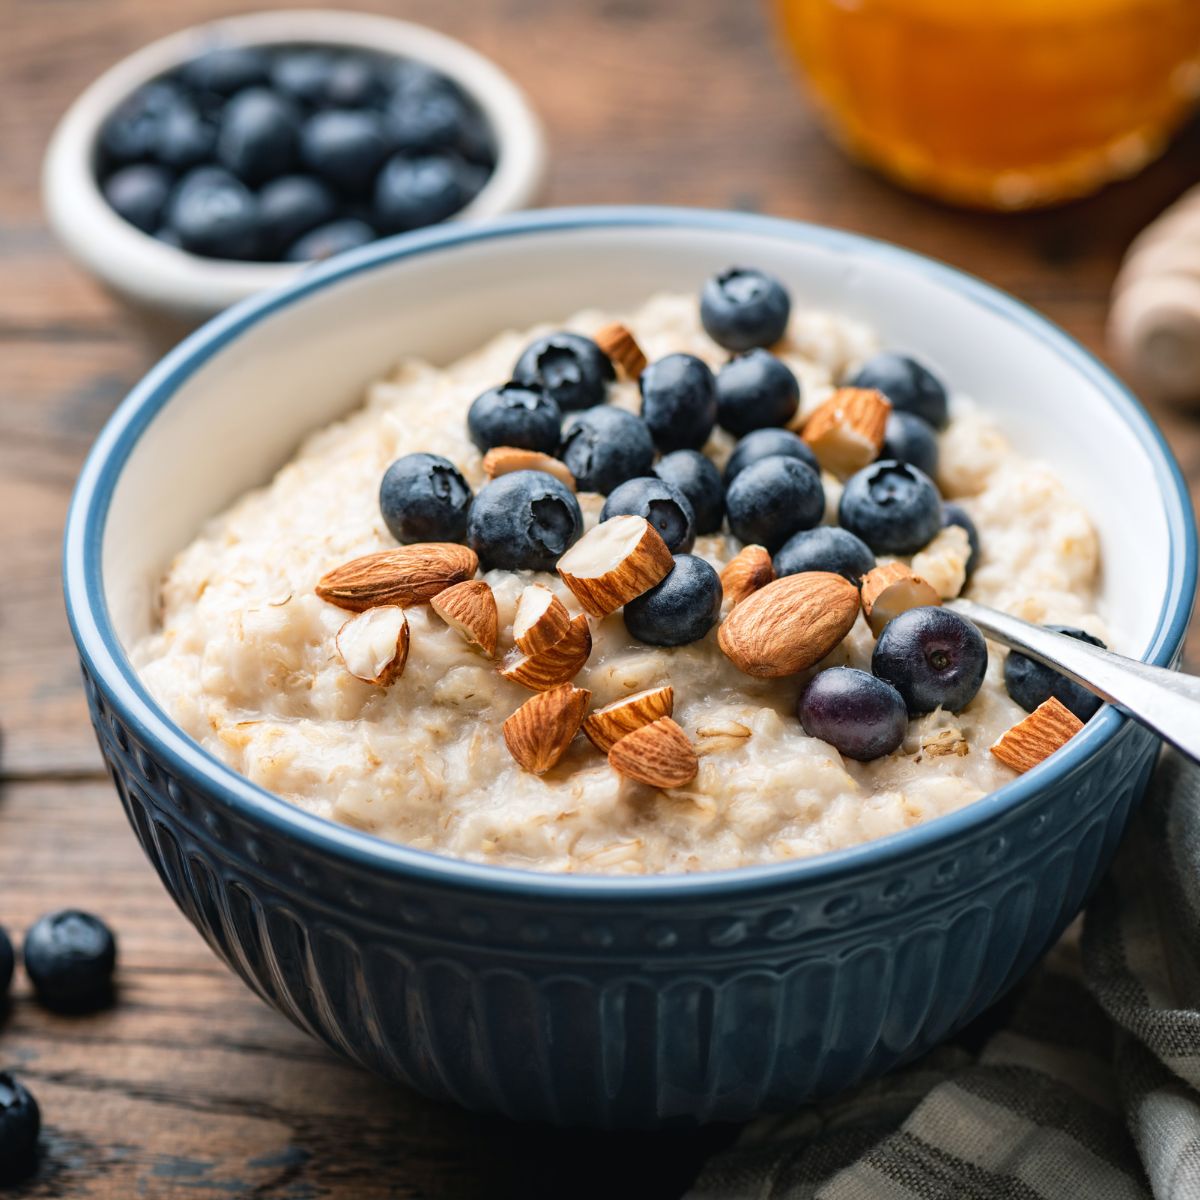 a bowl of oatmeal with blueberries and almonds on a wooden table